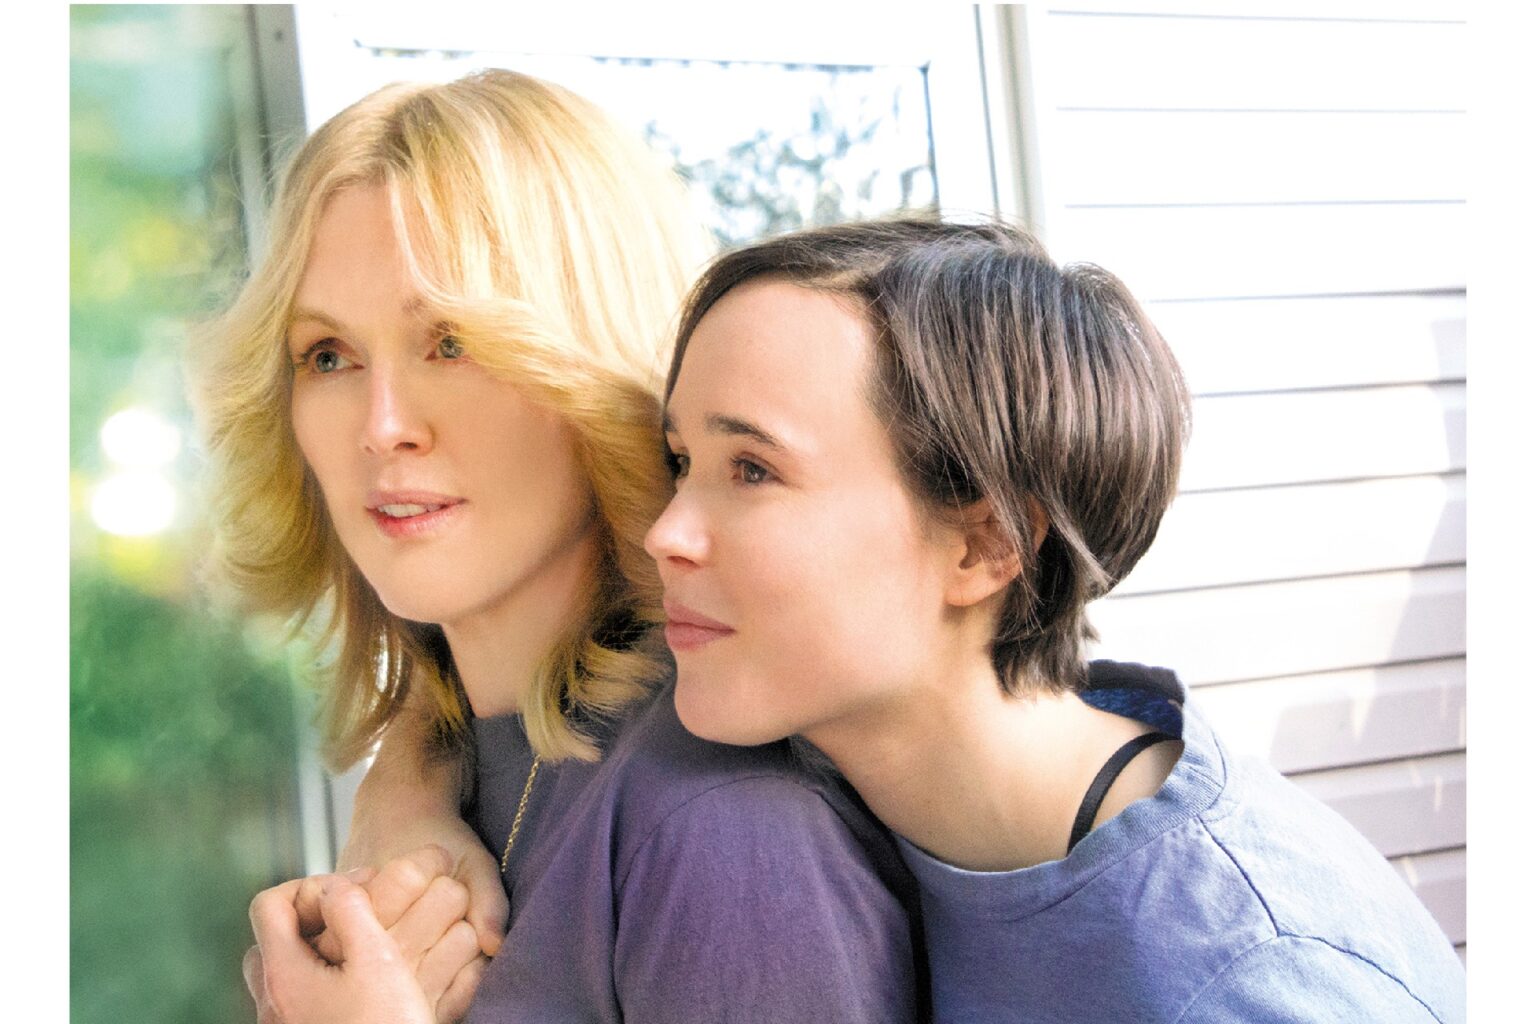 ©2015 Freeheld Movie, LLC.All Rights Reserved